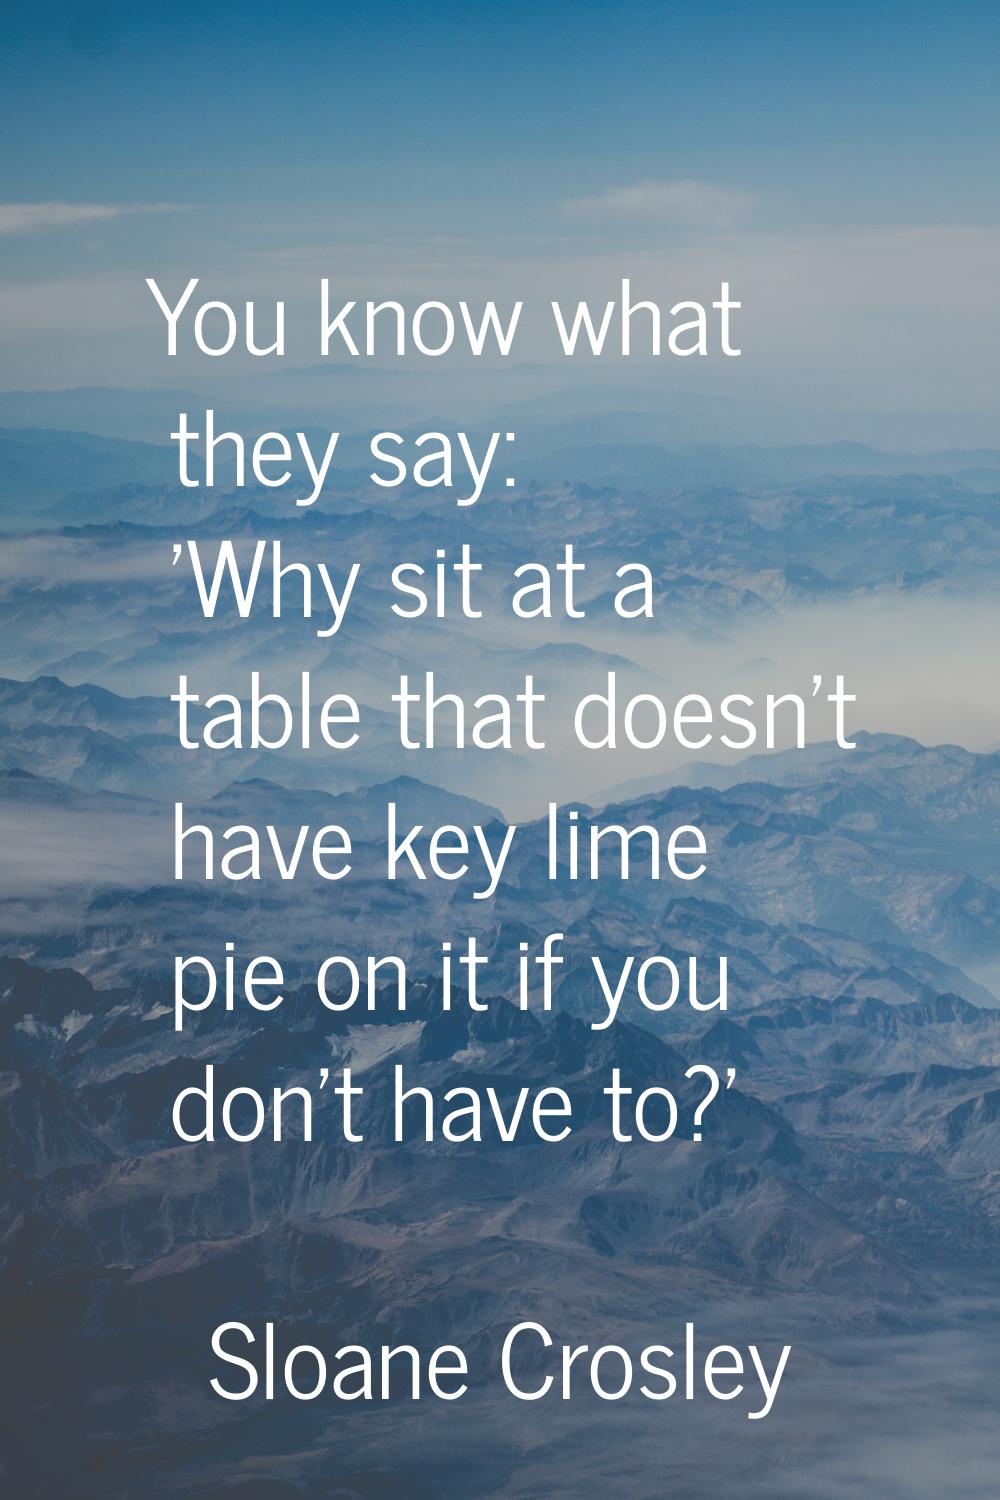 You know what they say: 'Why sit at a table that doesn't have key lime pie on it if you don't have 